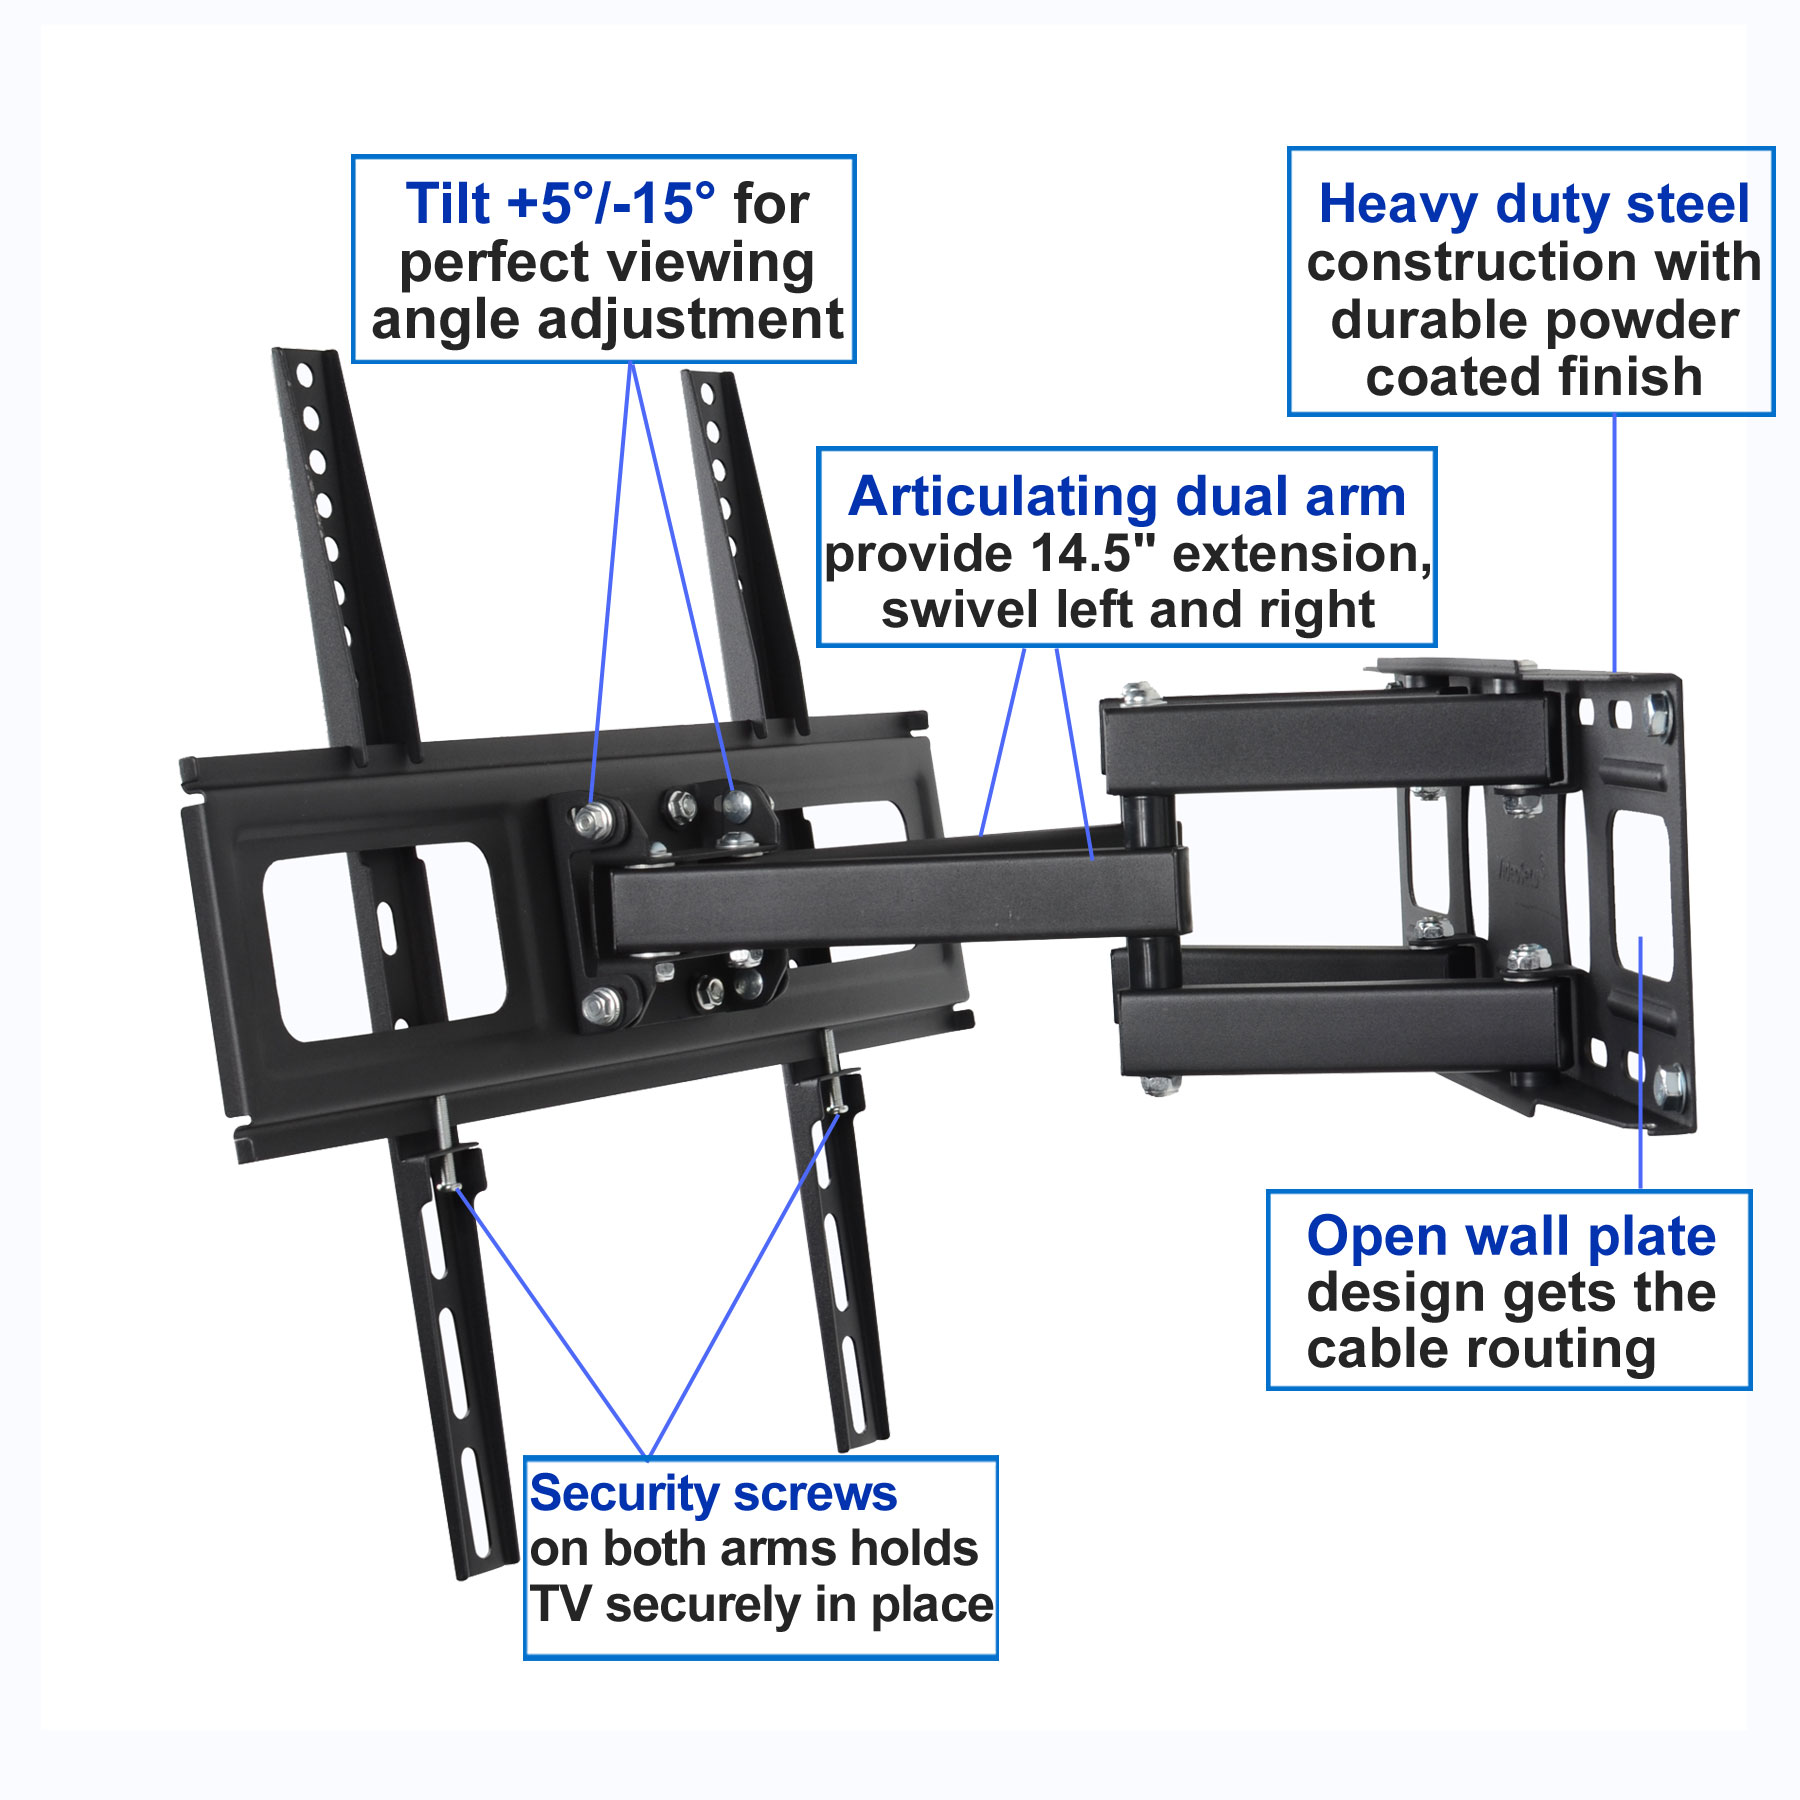 VideoSecu Articulating TV Wall Mount Tilt Swivel Dual Arms Bracket for Most 27 32 39 42 43 46 47 48 50 55 inch LED LCD Plasma HDTV Flat Panel Screen Display, with Full Motion Extend VESA 400x400mm bxk - image 2 of 6